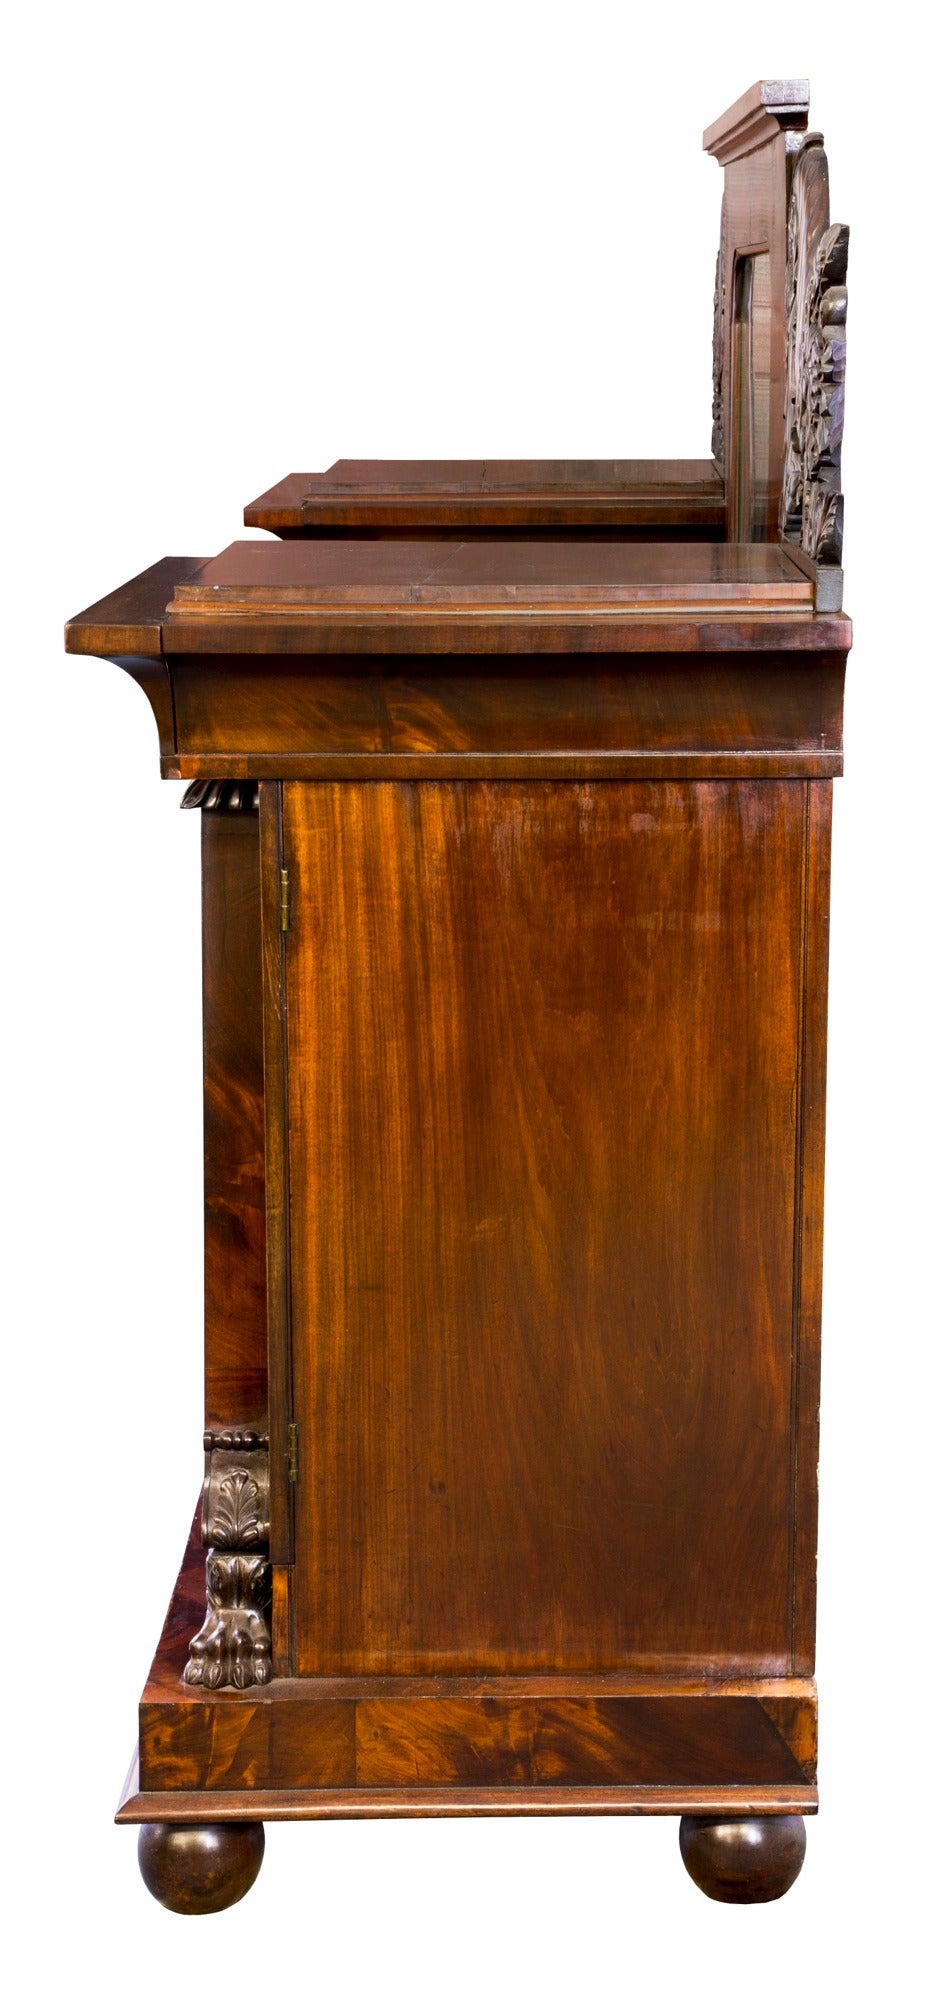 Early 19th Century Classical Carved Mahogany Sideboard, Baltimore, circa 1820